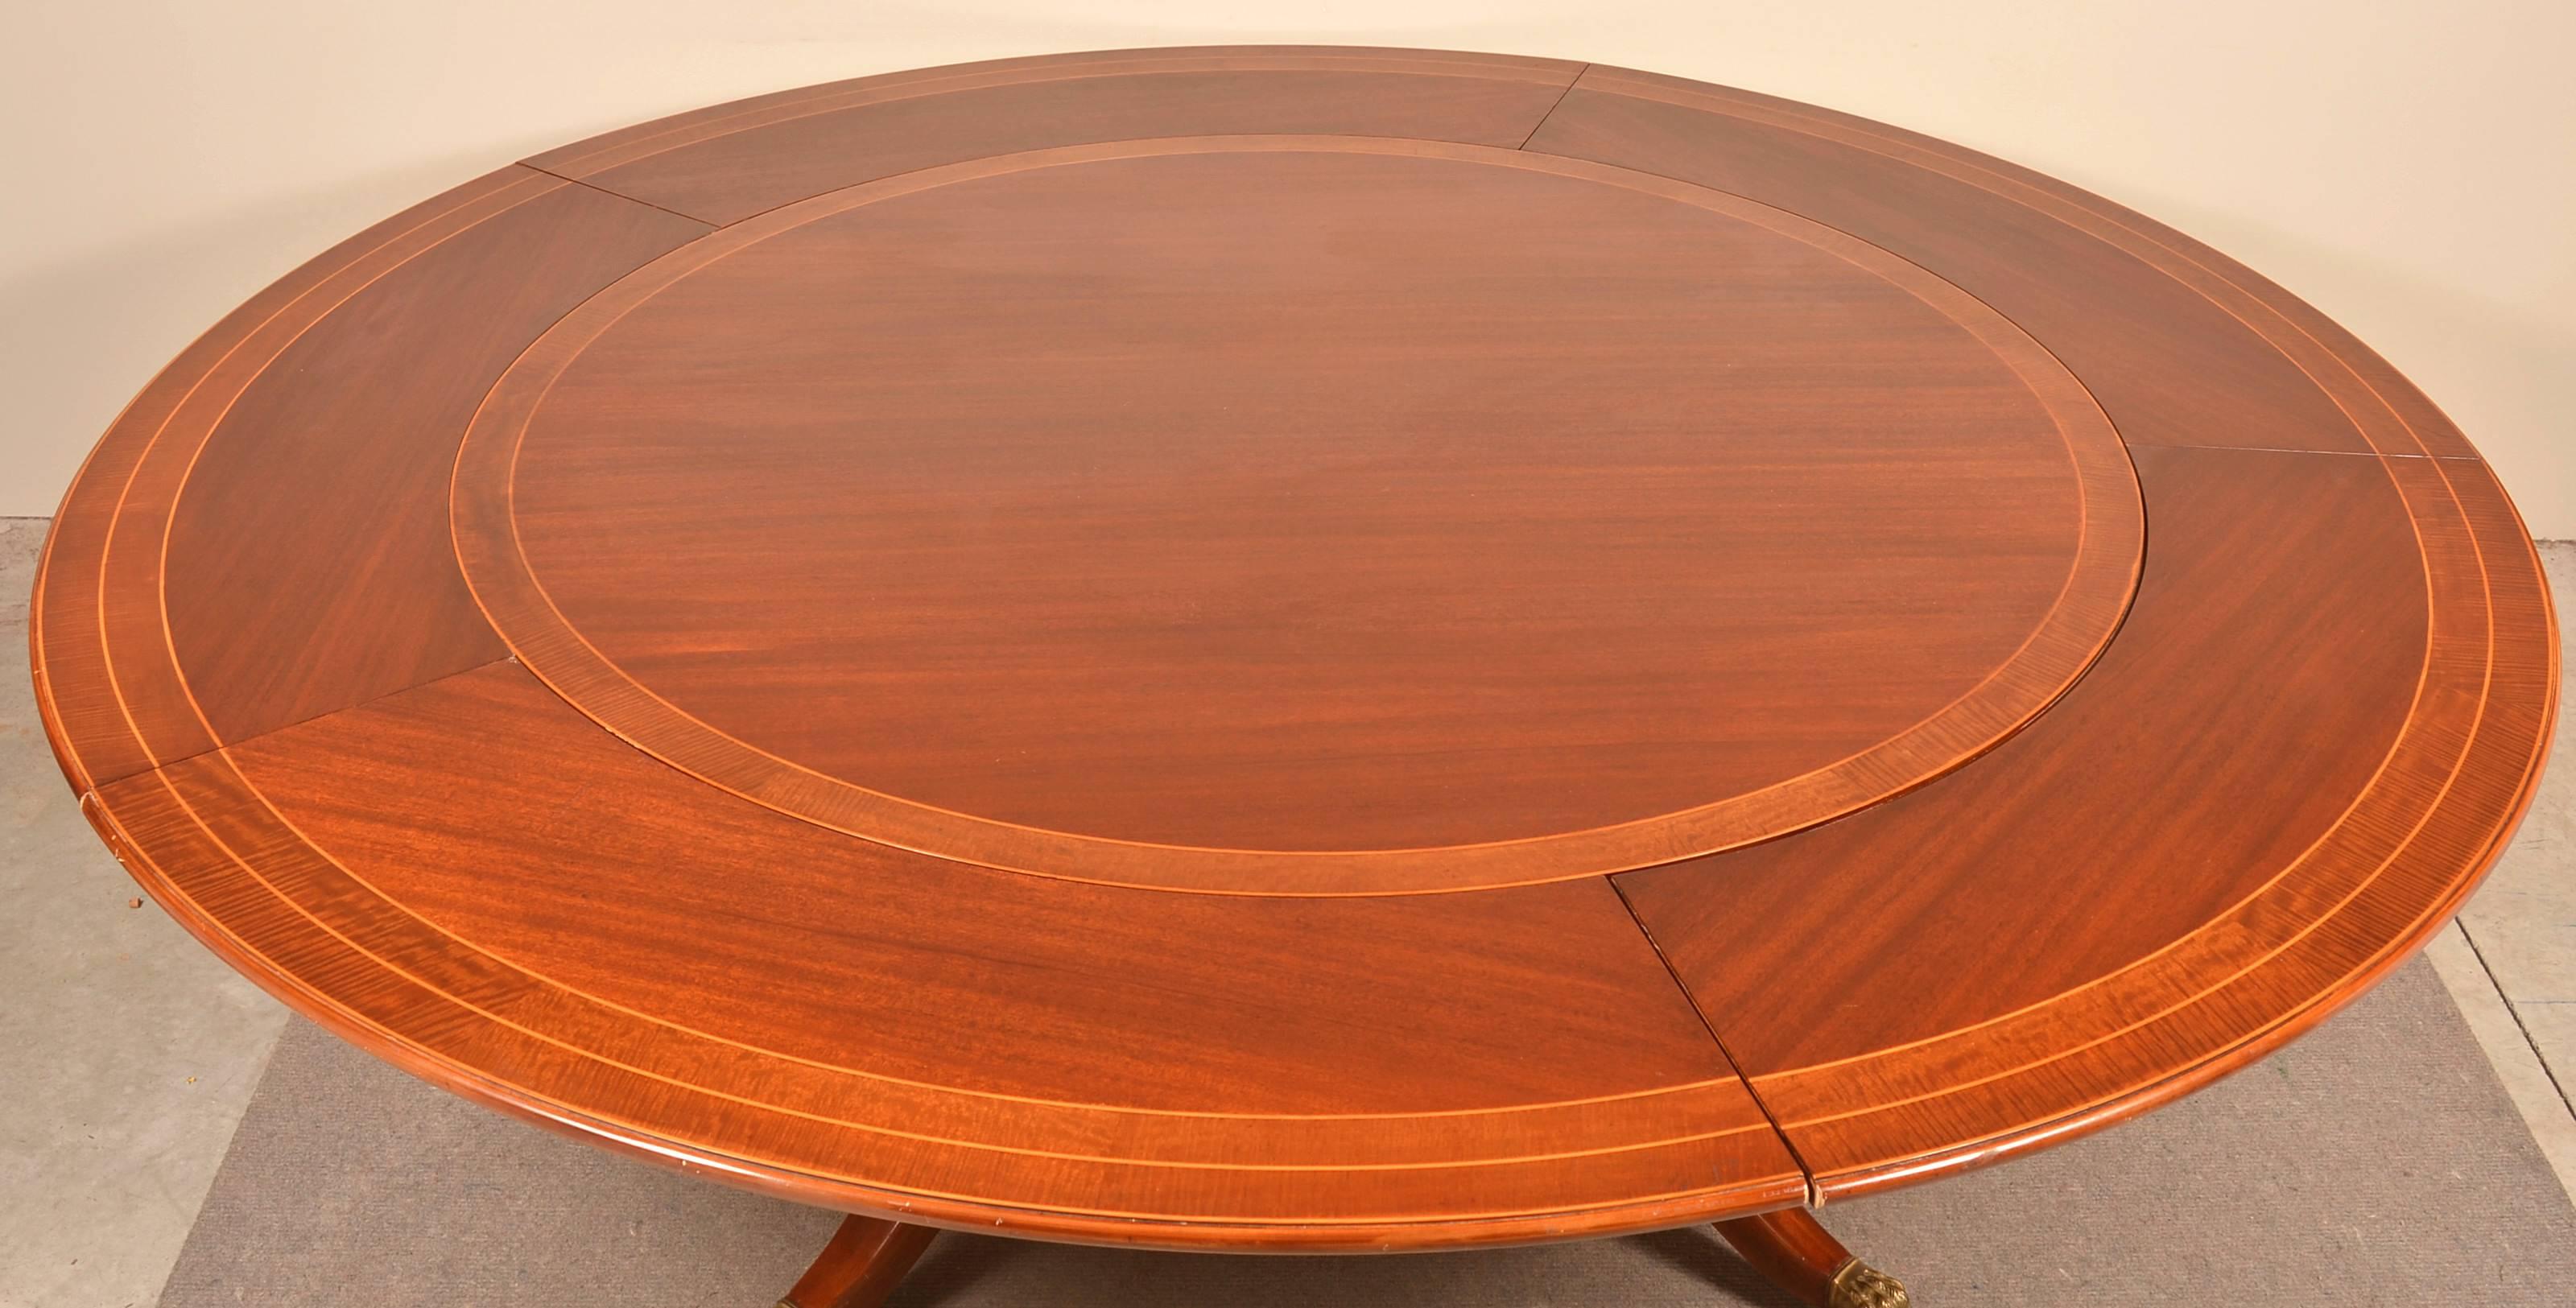 Mahogany federal style circular top dining table. Top with banded inlay, turned supports, shaped legs with brass capped paw feet. Accompanied with the original 14